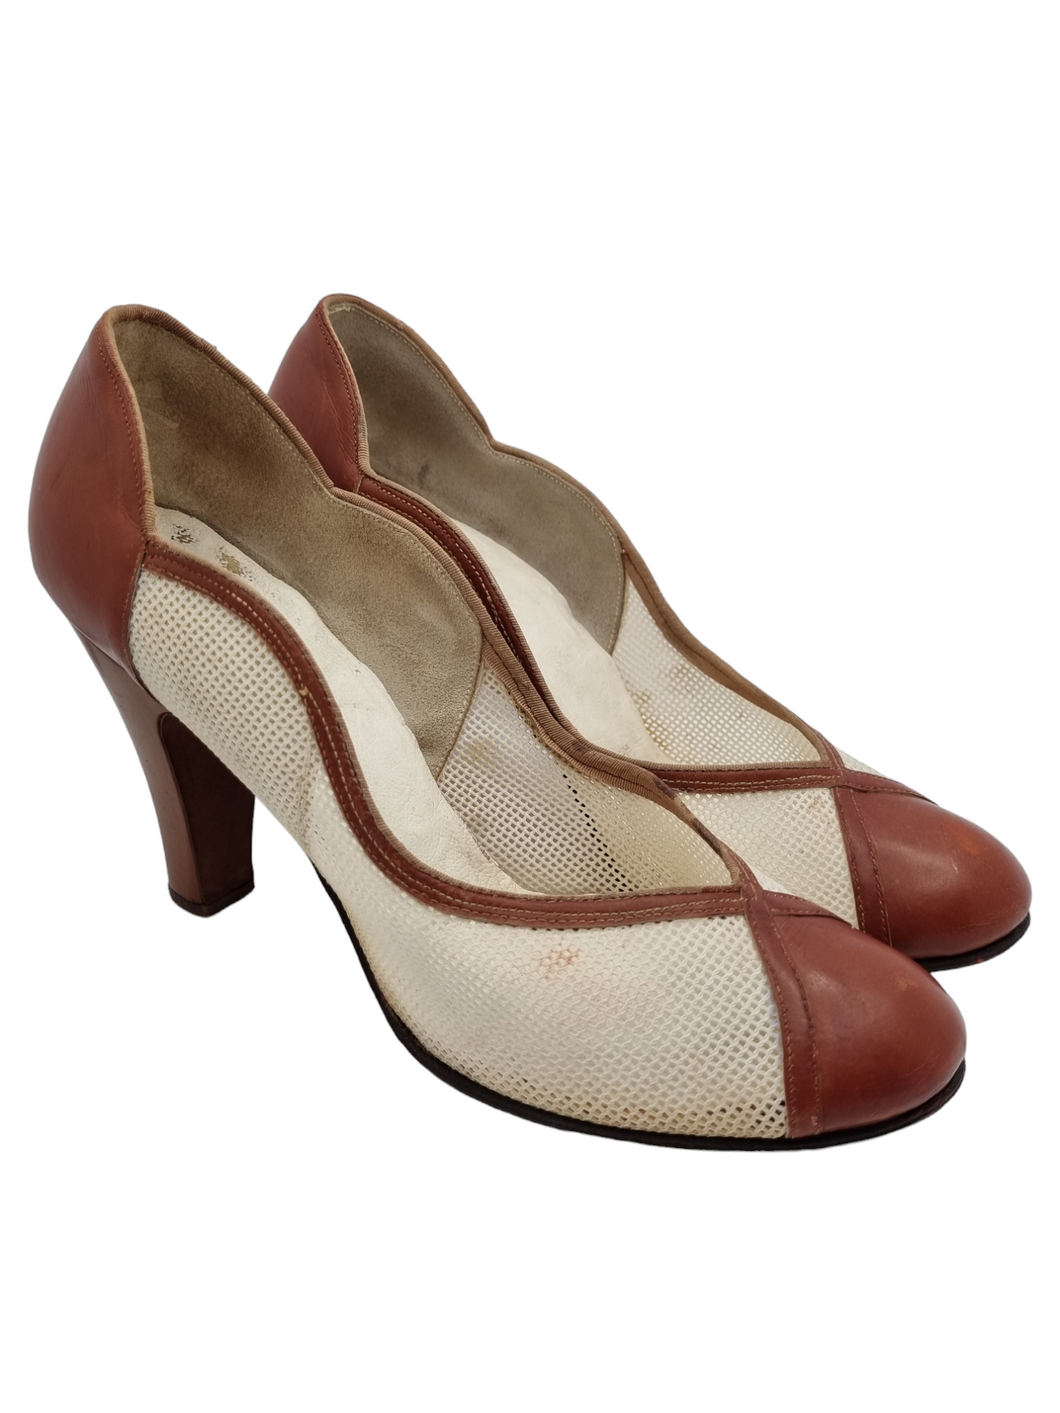 1940s Tan Leather and Cream Mesh Scalloped Shoes